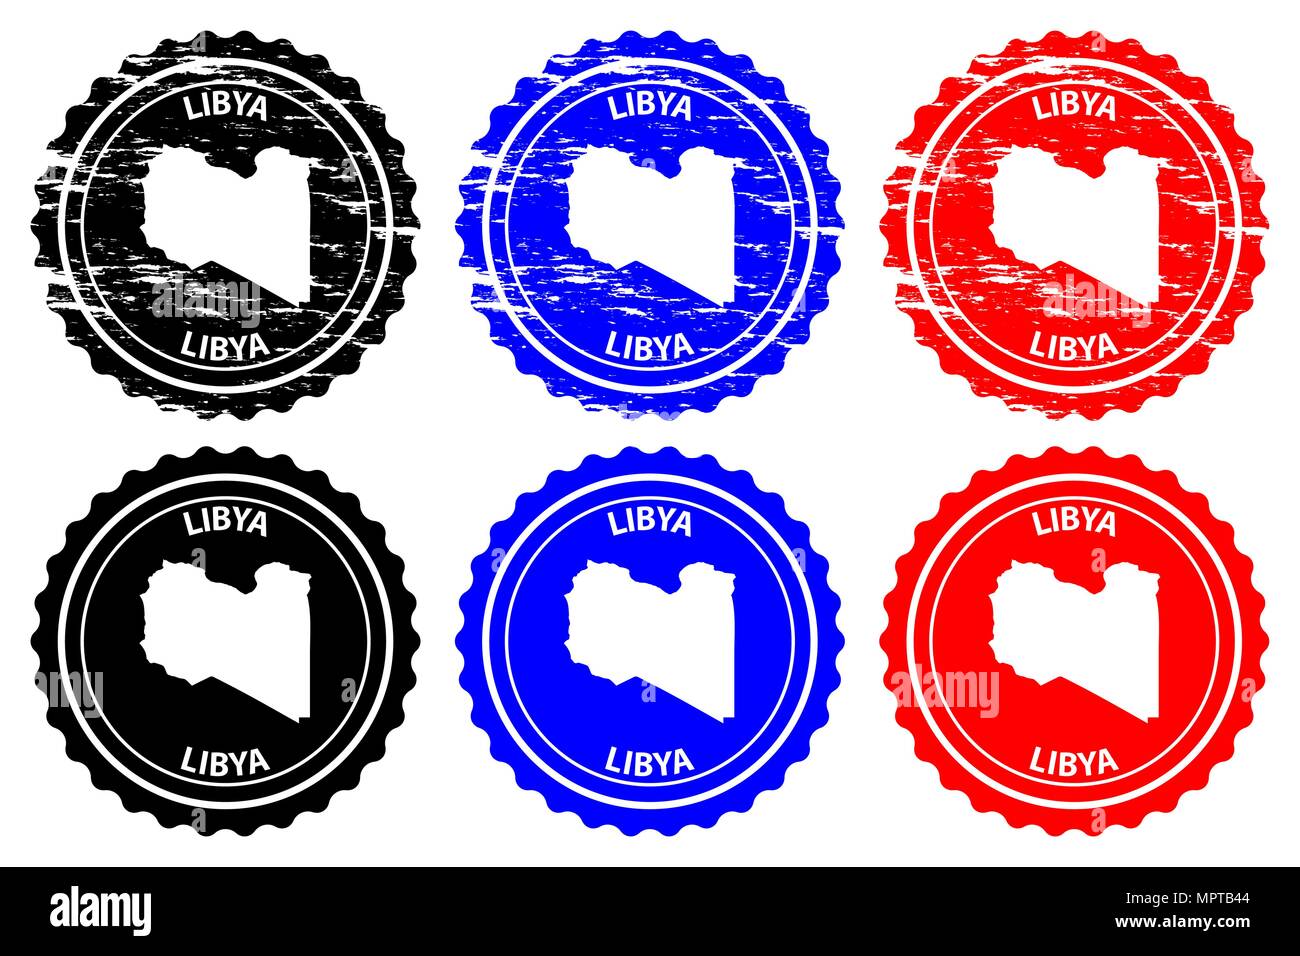 Libya - rubber stamp - vector, State of Libya map pattern - sticker - black, blue and red Stock Vector